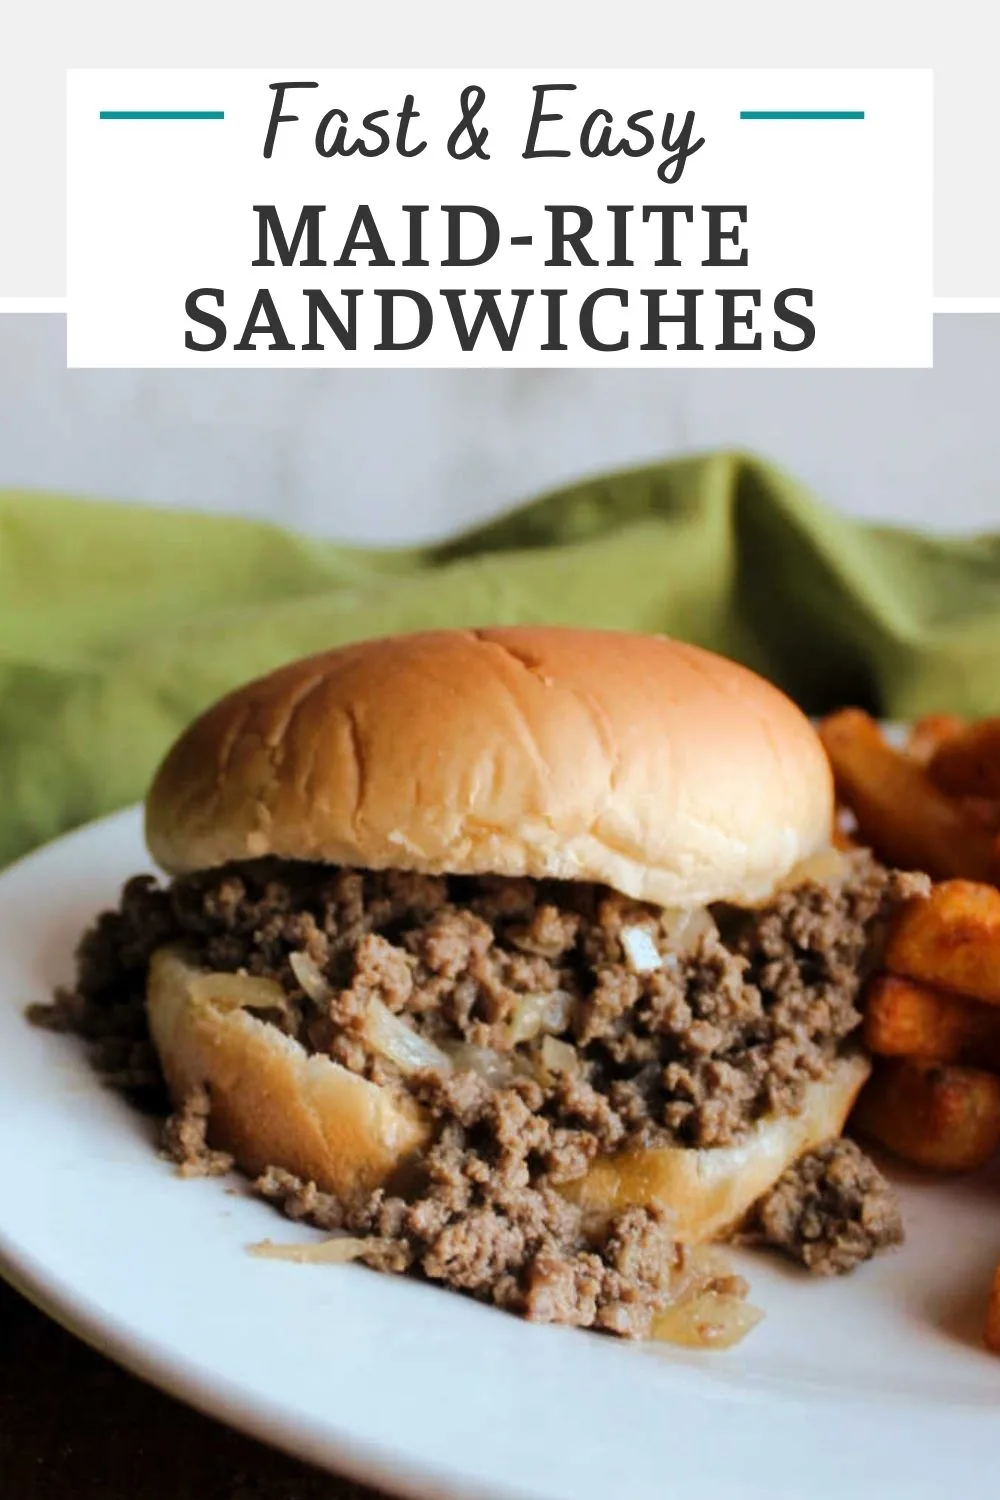 Maid-rites, tavern burgers or loose meat sandwiches, are a super quick and easy dinner that your family is sure to love! This easy maid rite recipe is a staple around here and for good reason!